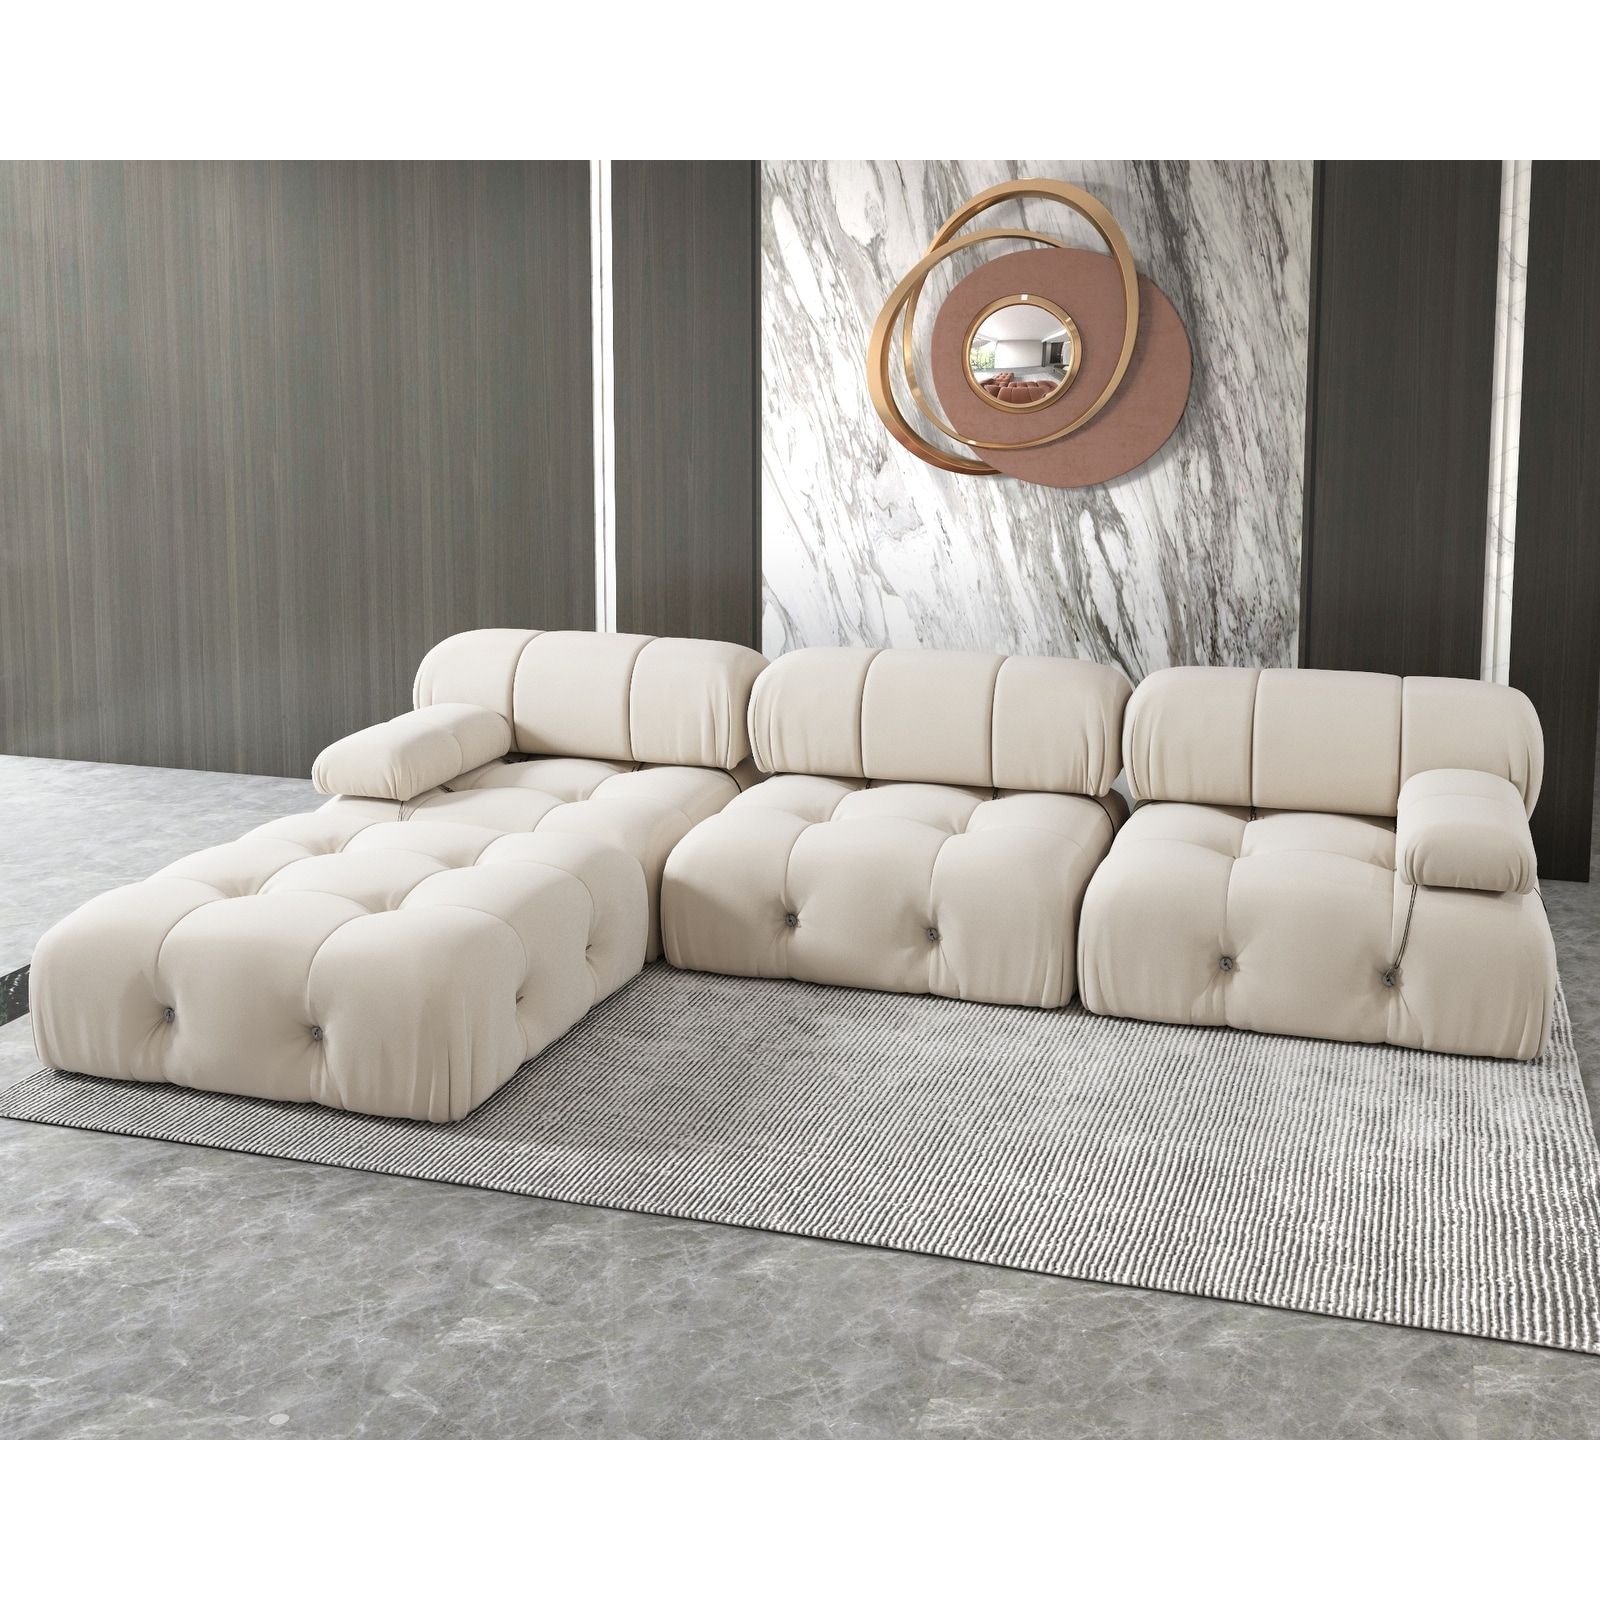 Modern Velvet Upholstered Large Modular Sectional Sofa – On Sale – –  35271394 In Upholstered Modular Couches With Storage (View 9 of 20)